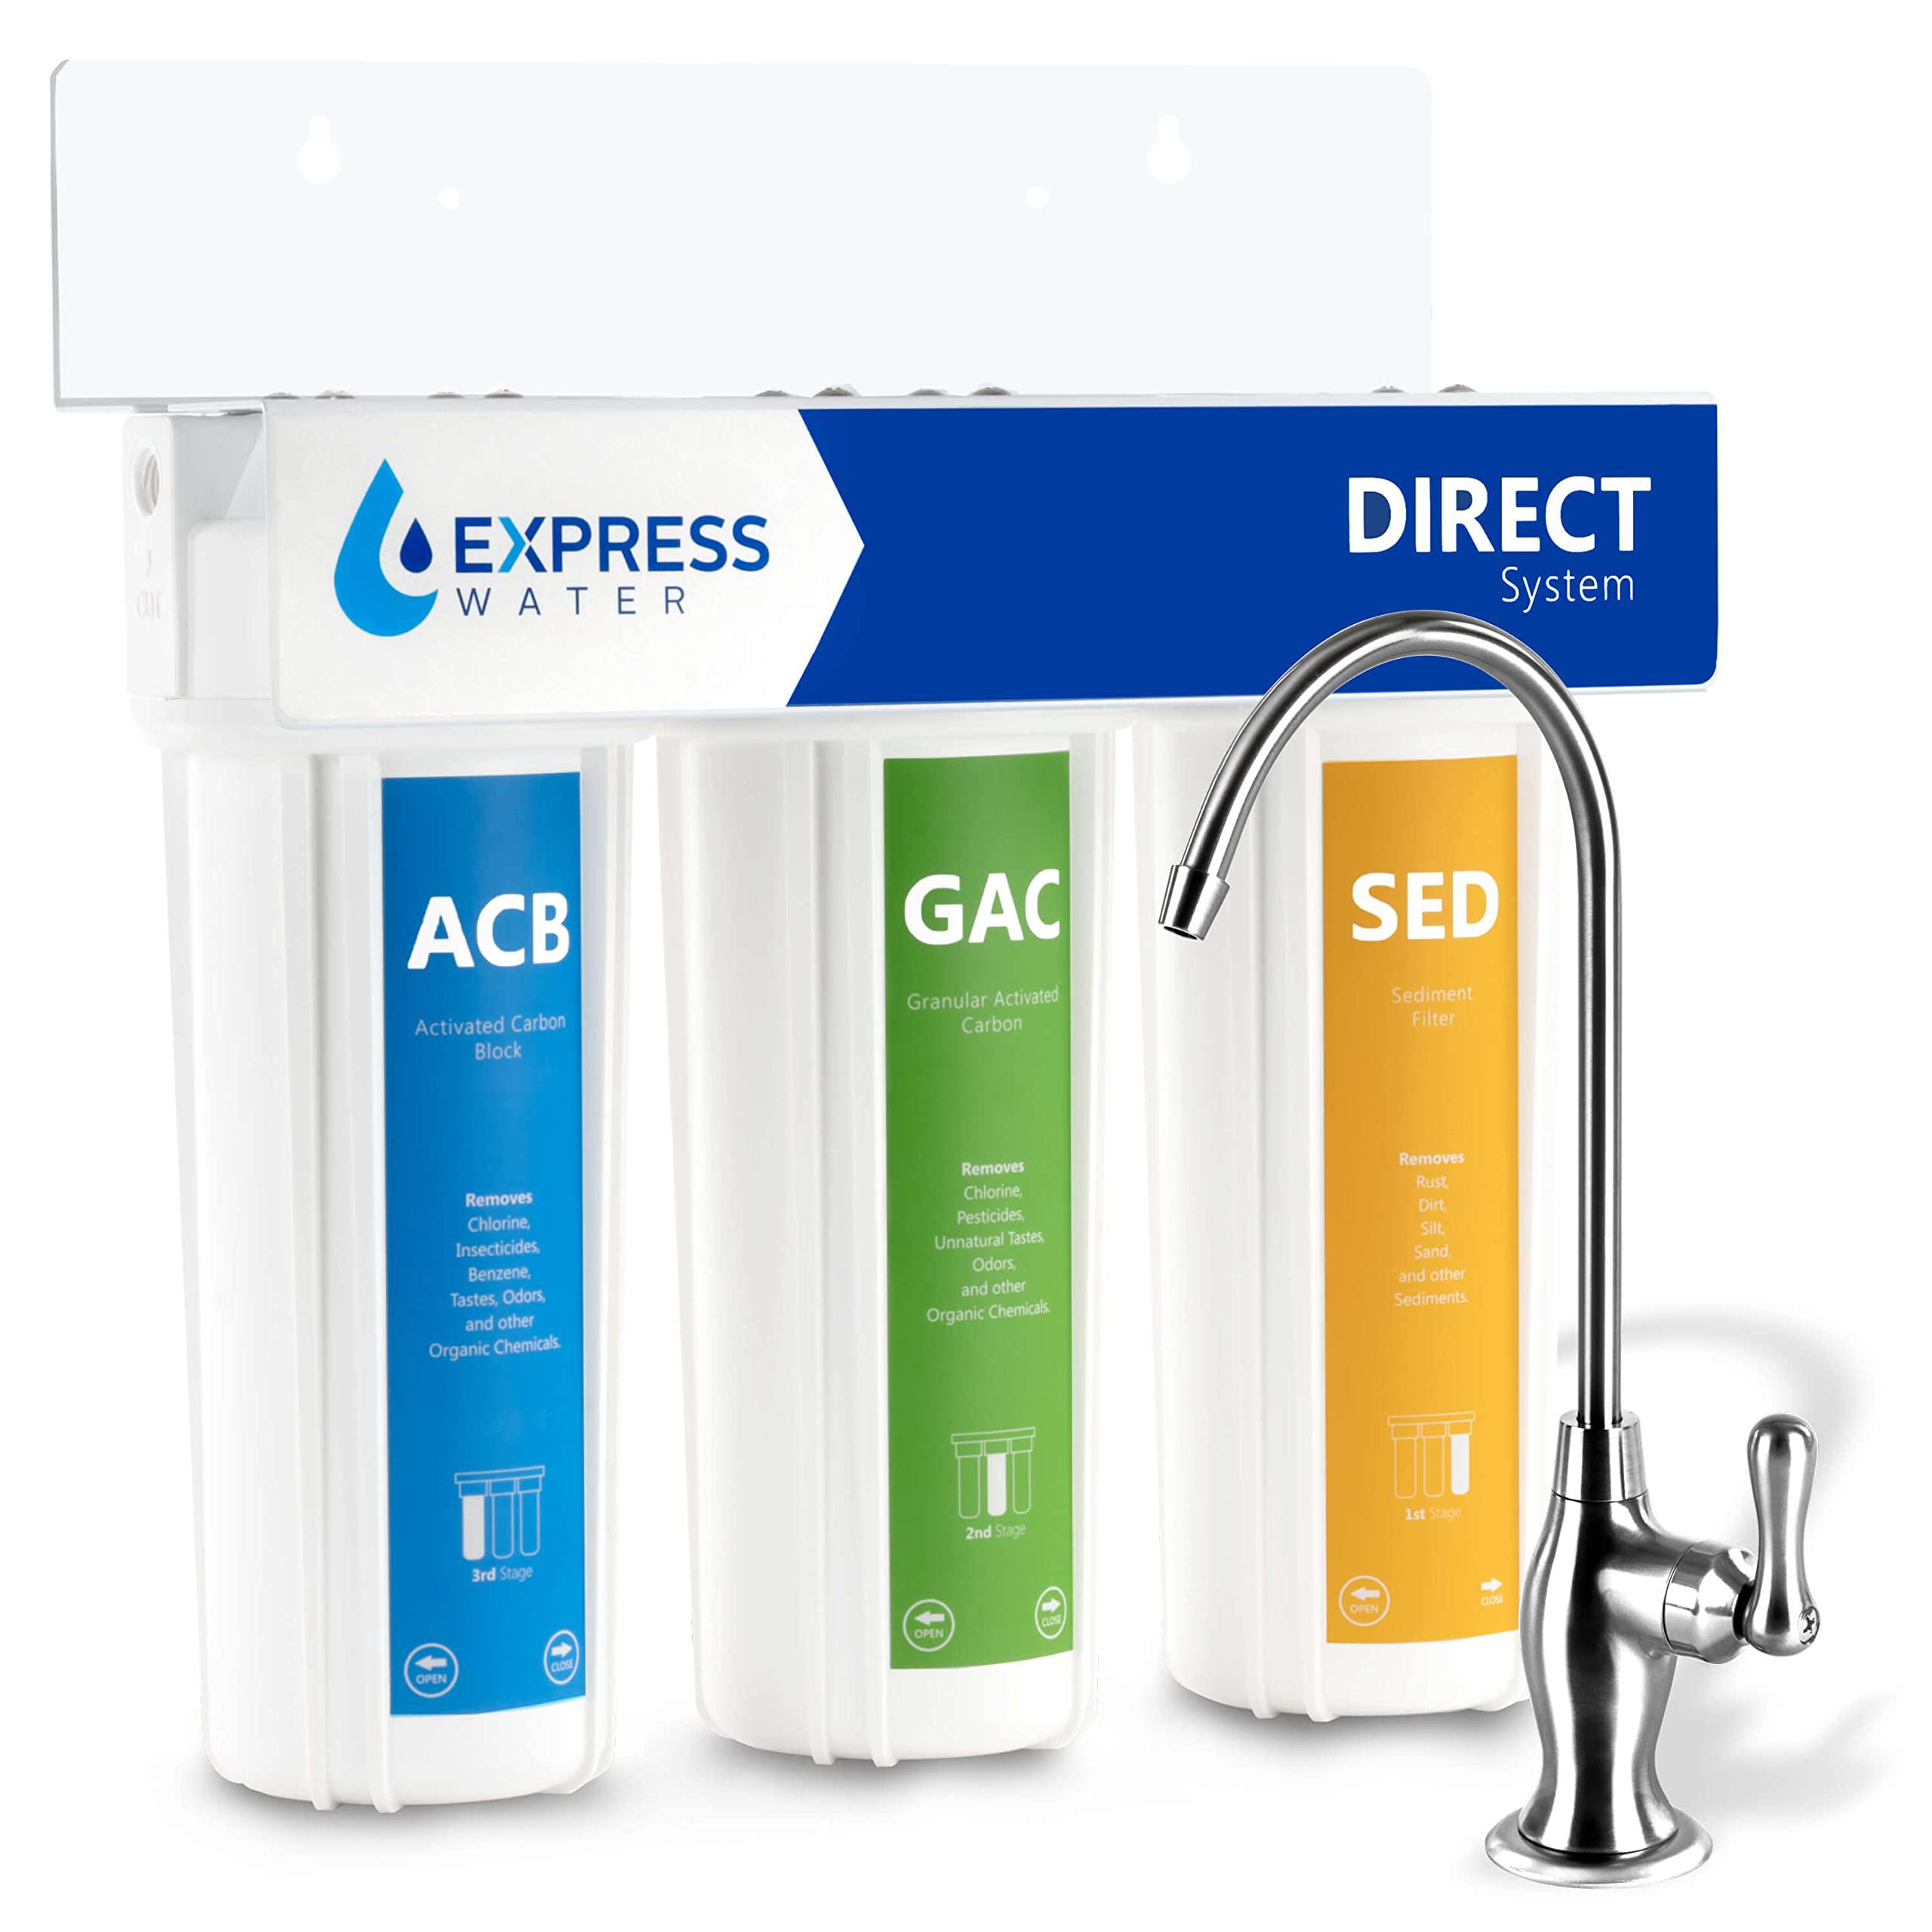 express water direct water filtration system - 3 stage direct water filter system with chrome faucet - under sink water filte